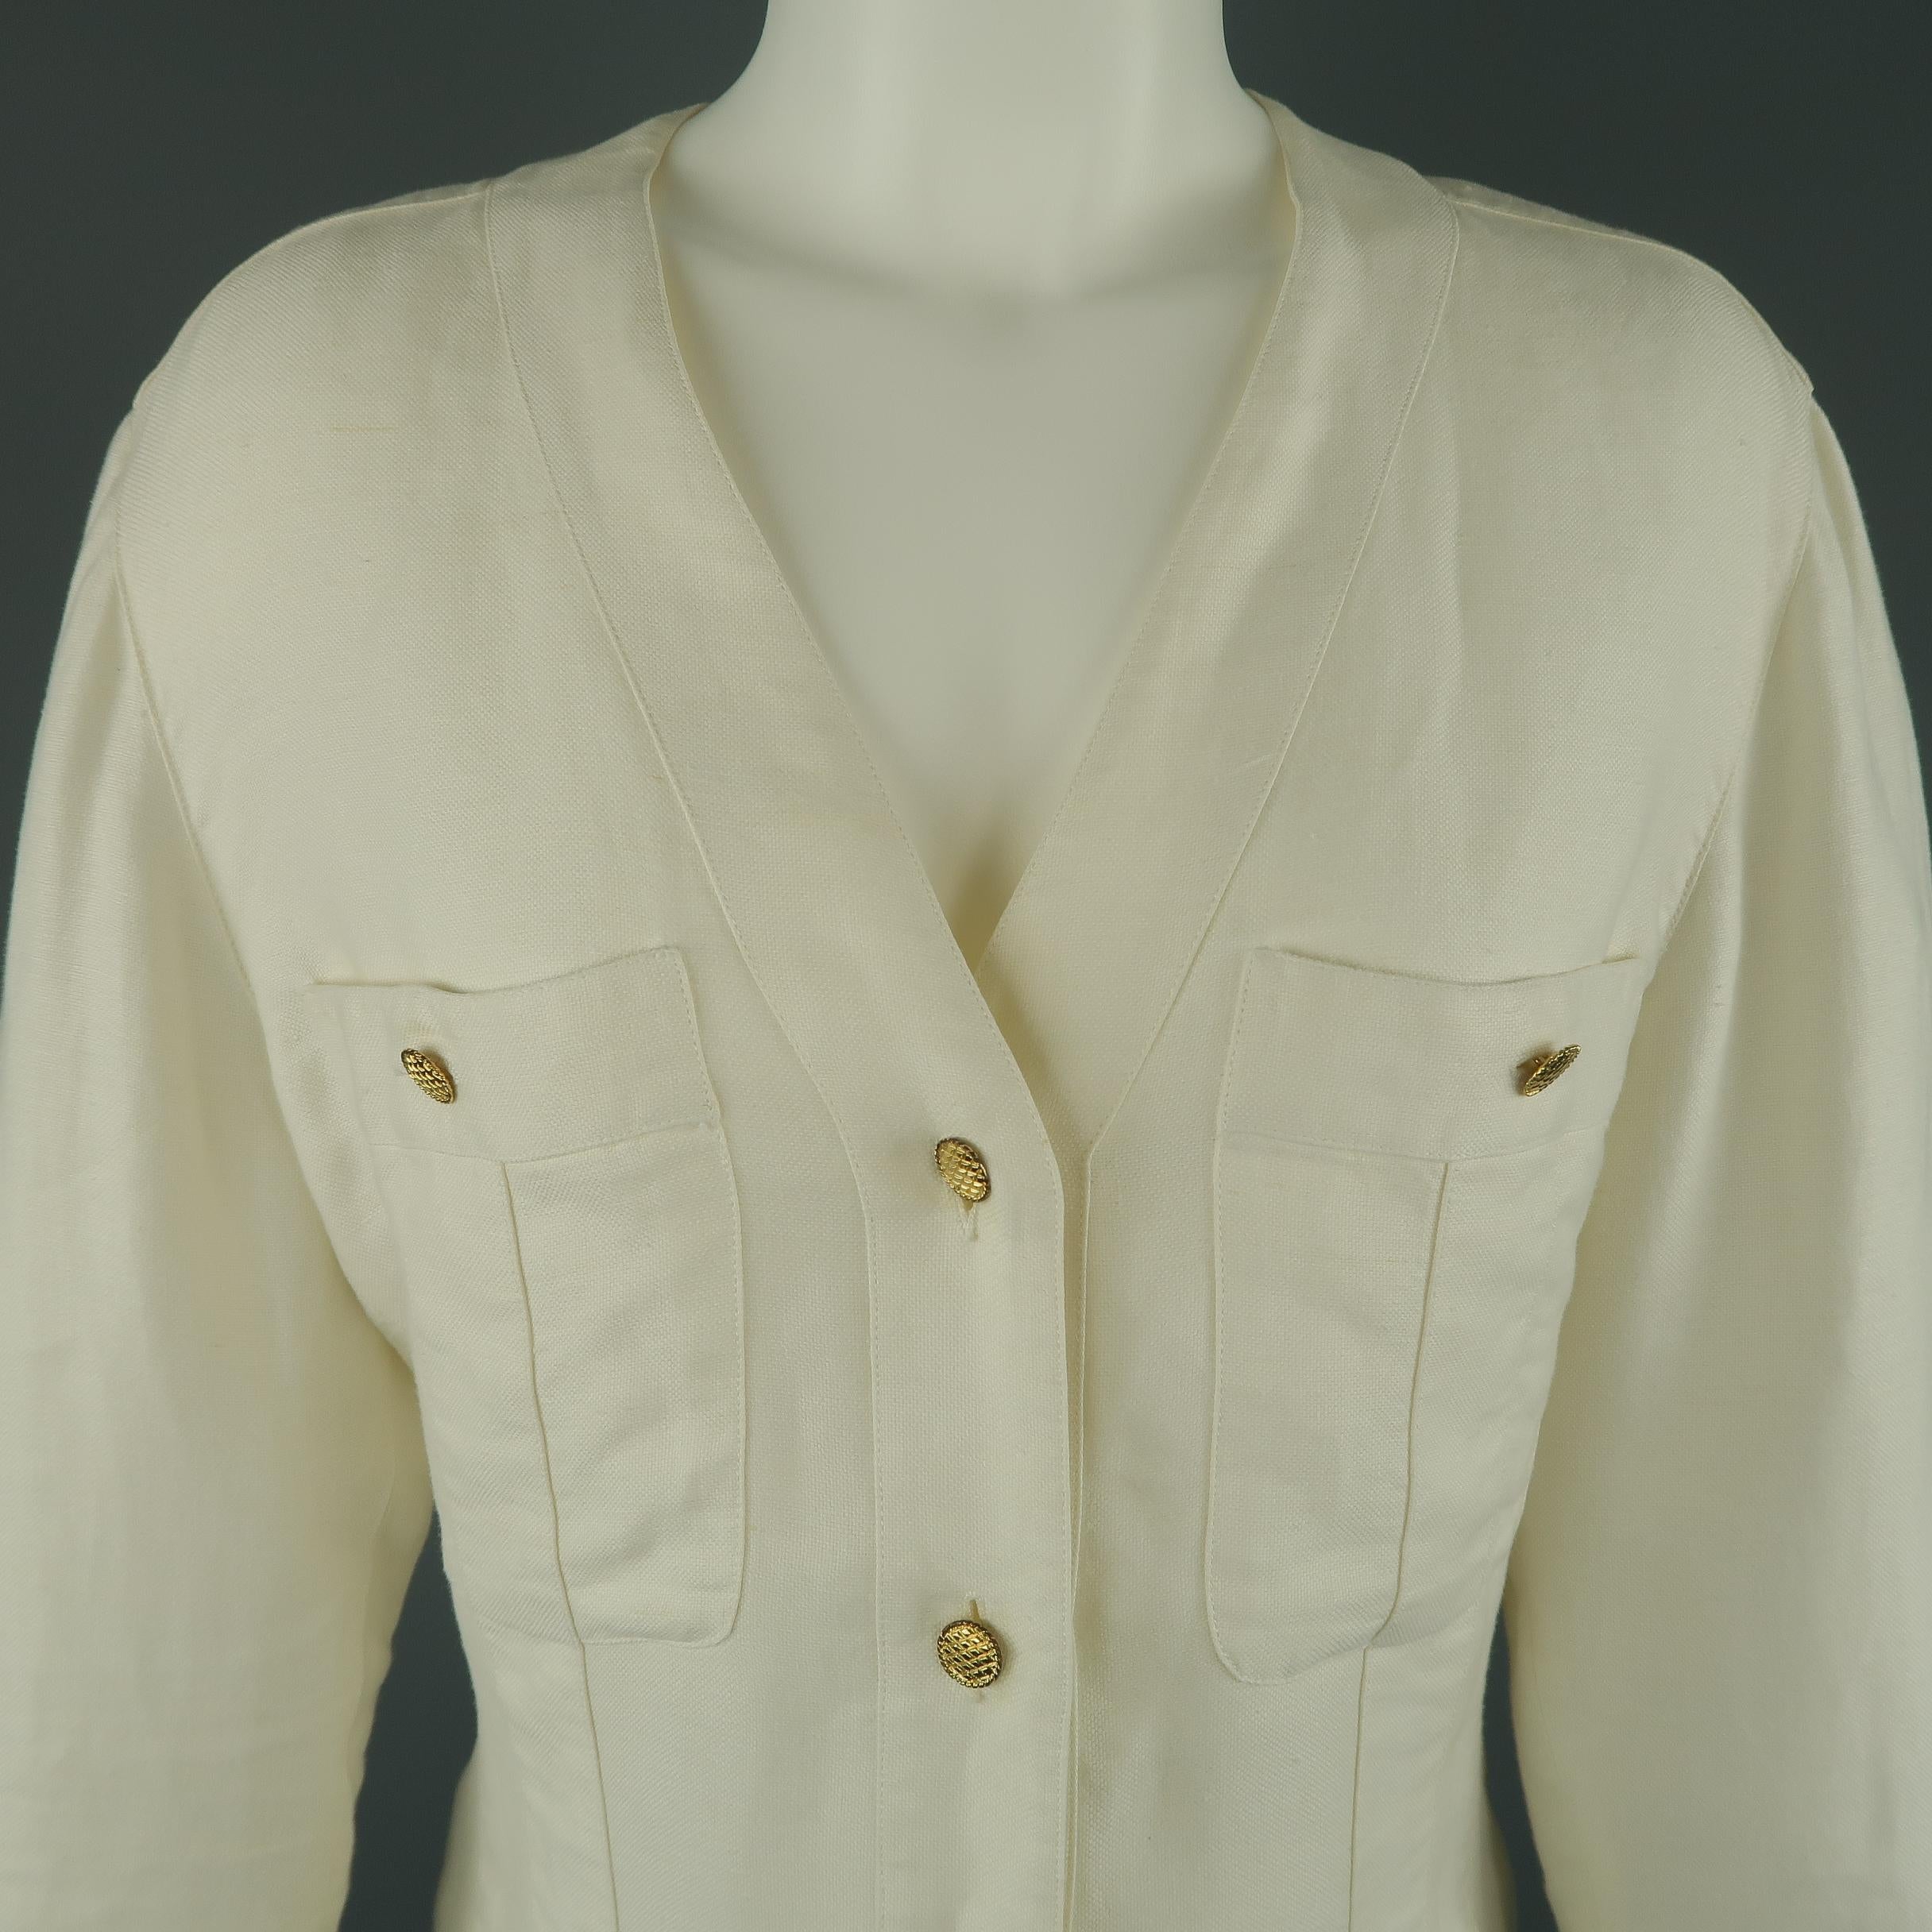 Vintage Chanel summer jacket comes in cream linen with a V neckline, yellow gold tone metal buttons, and patch button pockets. Discolorations throughout. Circa 1980's. As-is. Made in France.
 
Good Pre-Owned Condition.
Marked: FR 36
 
Measurements:
